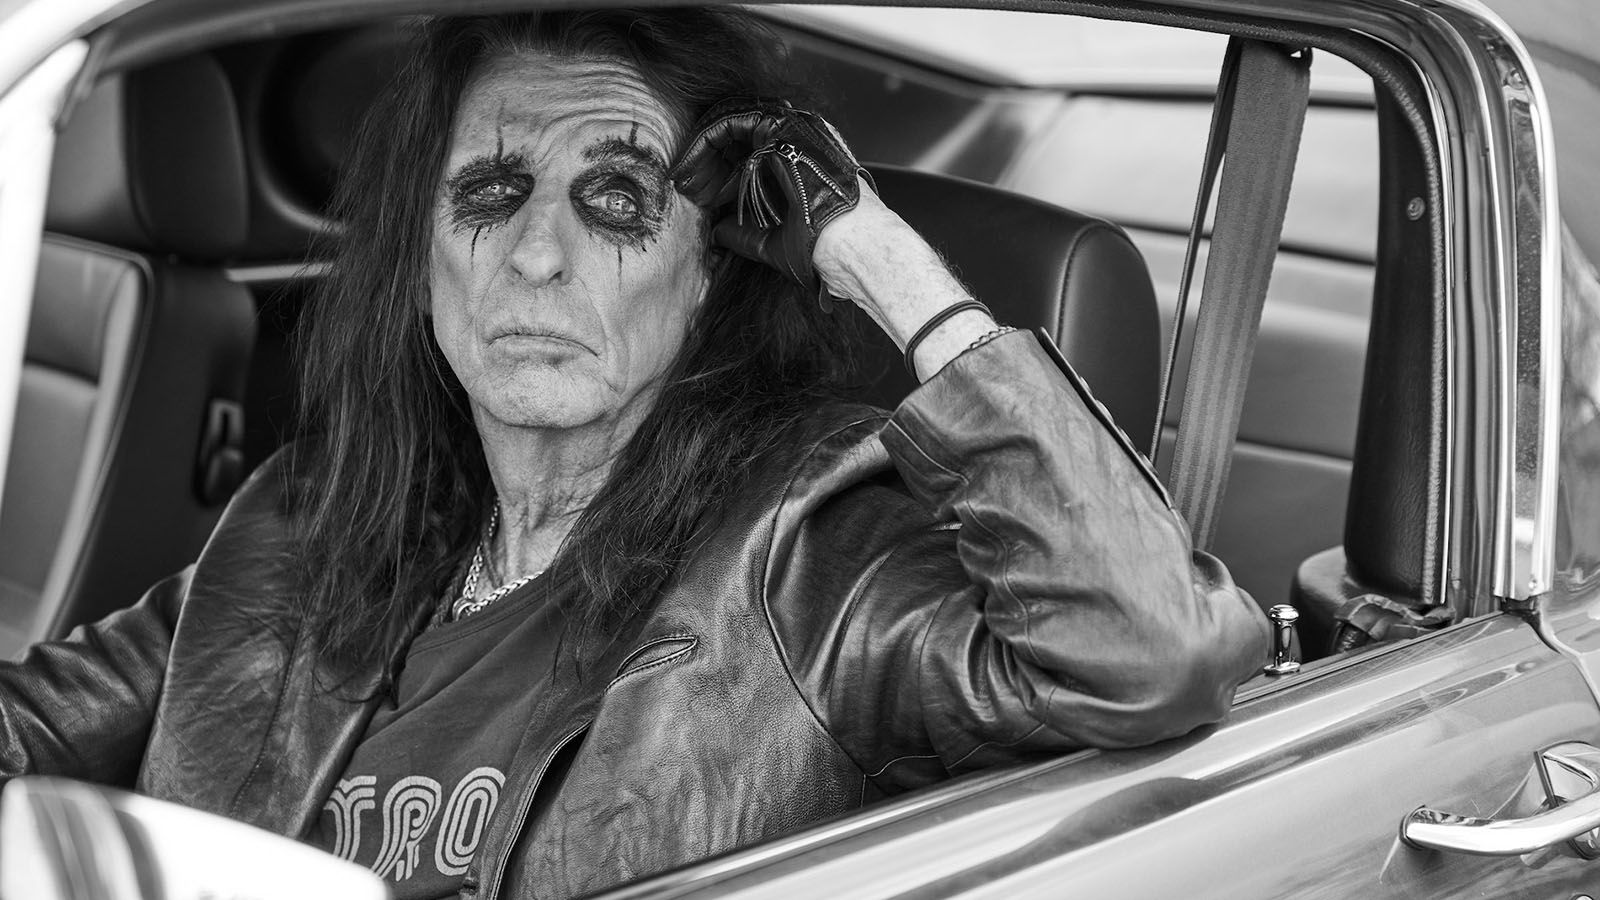 Rock and Roll Hall of Fame shock rocker Alice Cooper will be at Memorial Coliseum on Tuesday, May 2.